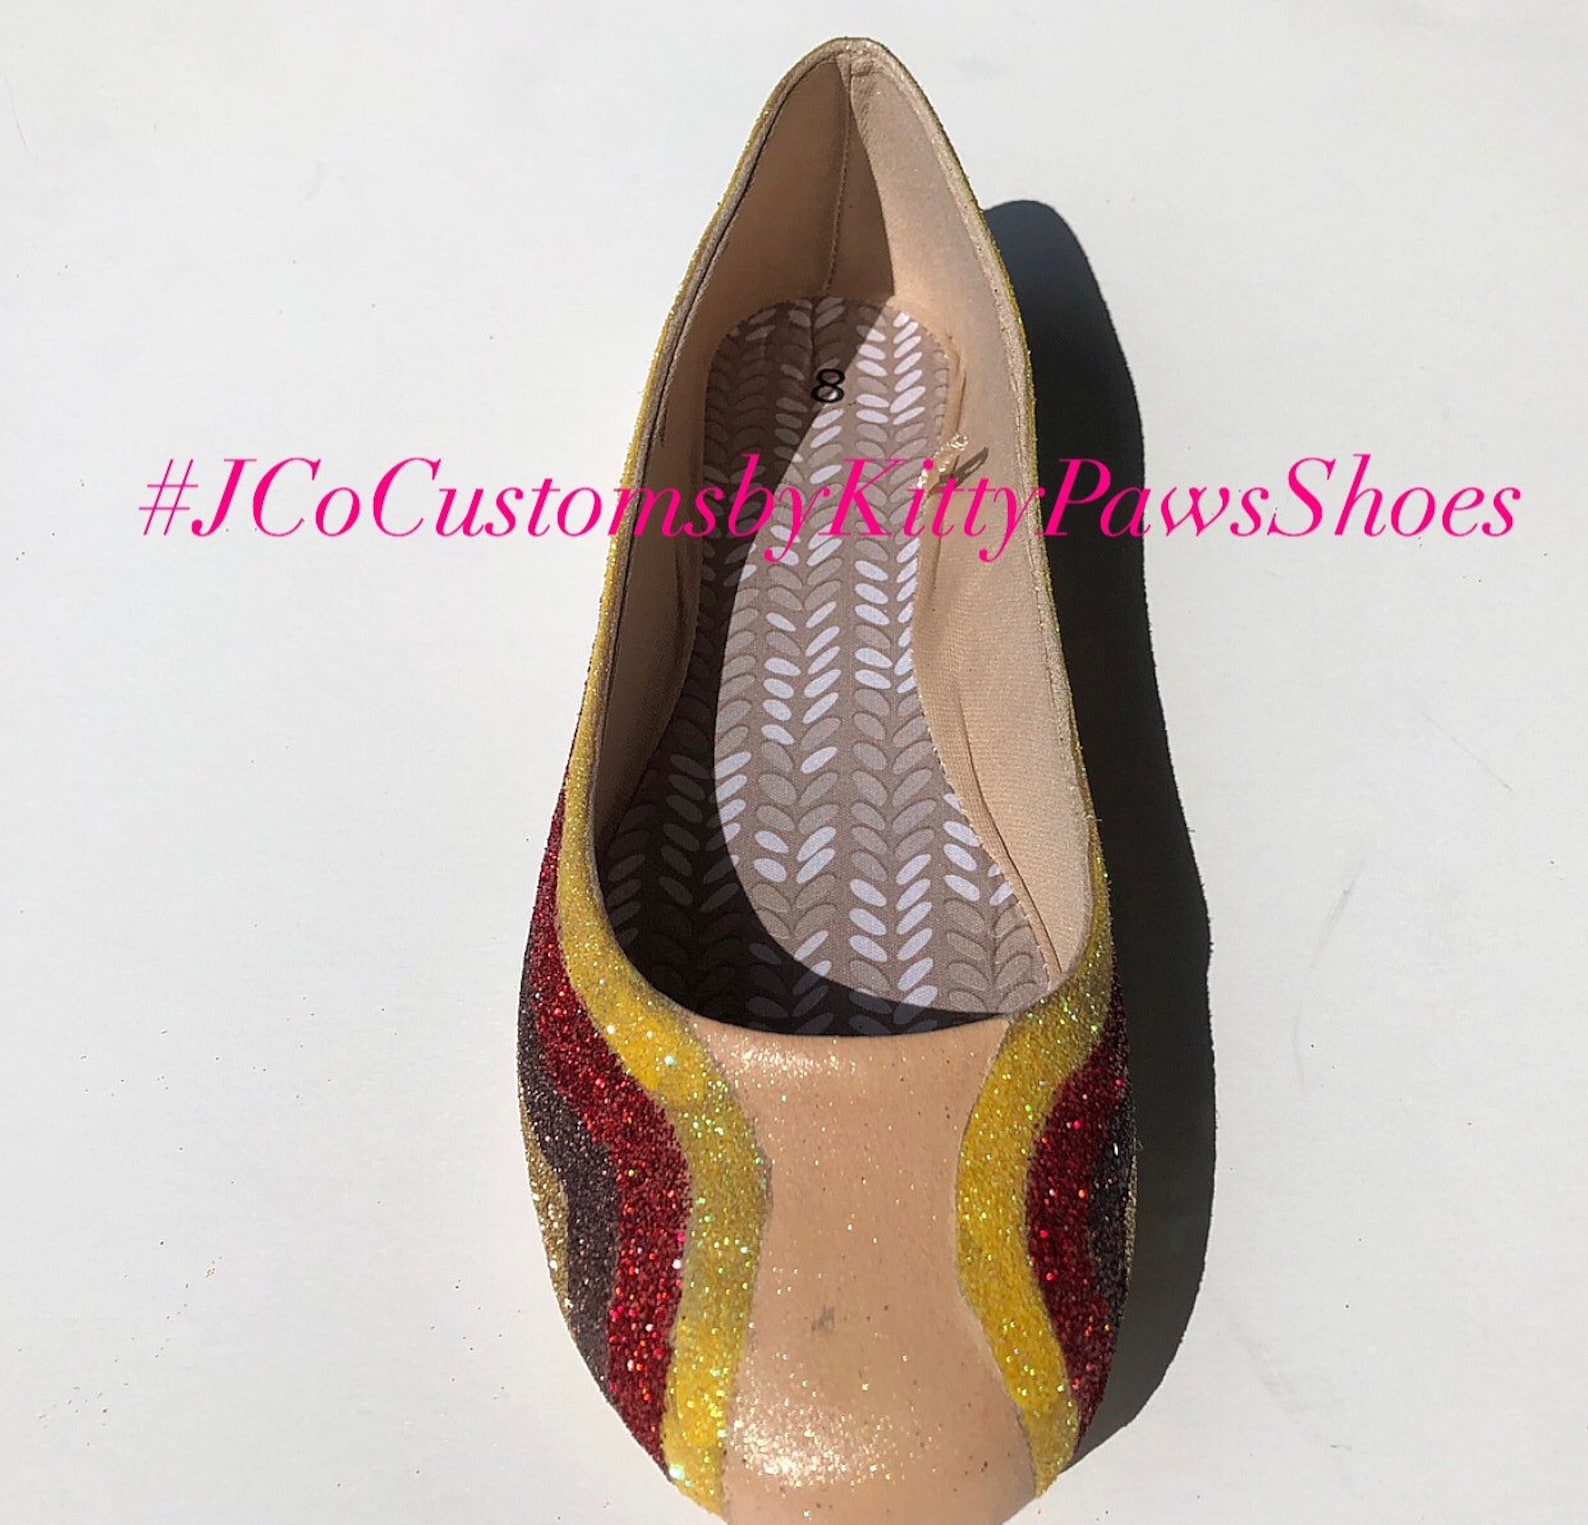 ballet flat women's custom gold red brown & champagne glitter striped flats *free u.s. shipping* jco.customs by kitty paws s